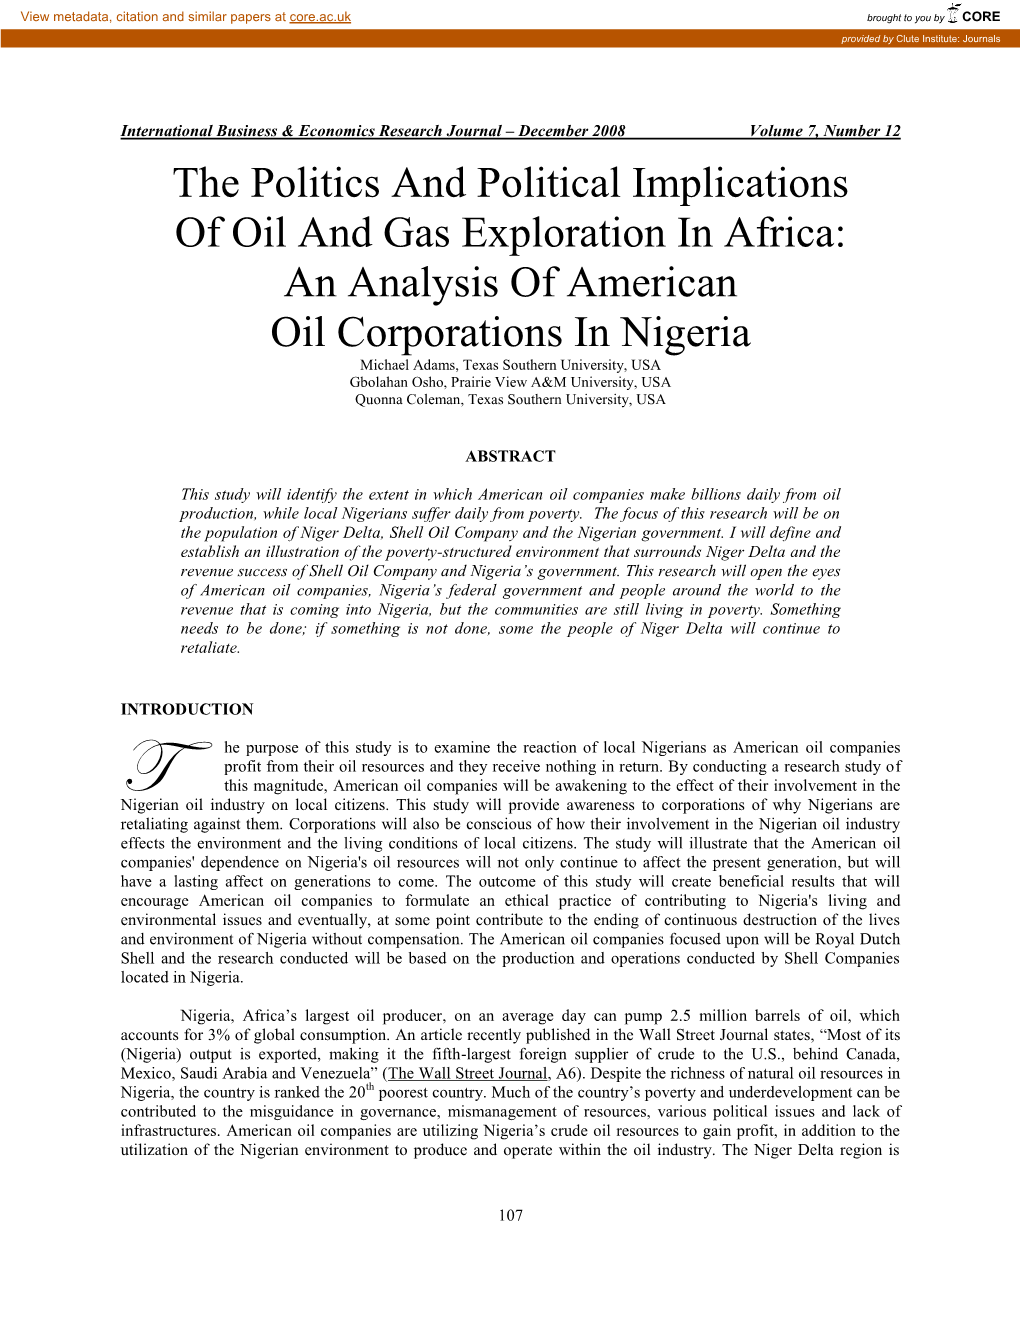 Analysis of American Oil Corporation in Nigeria's Oil